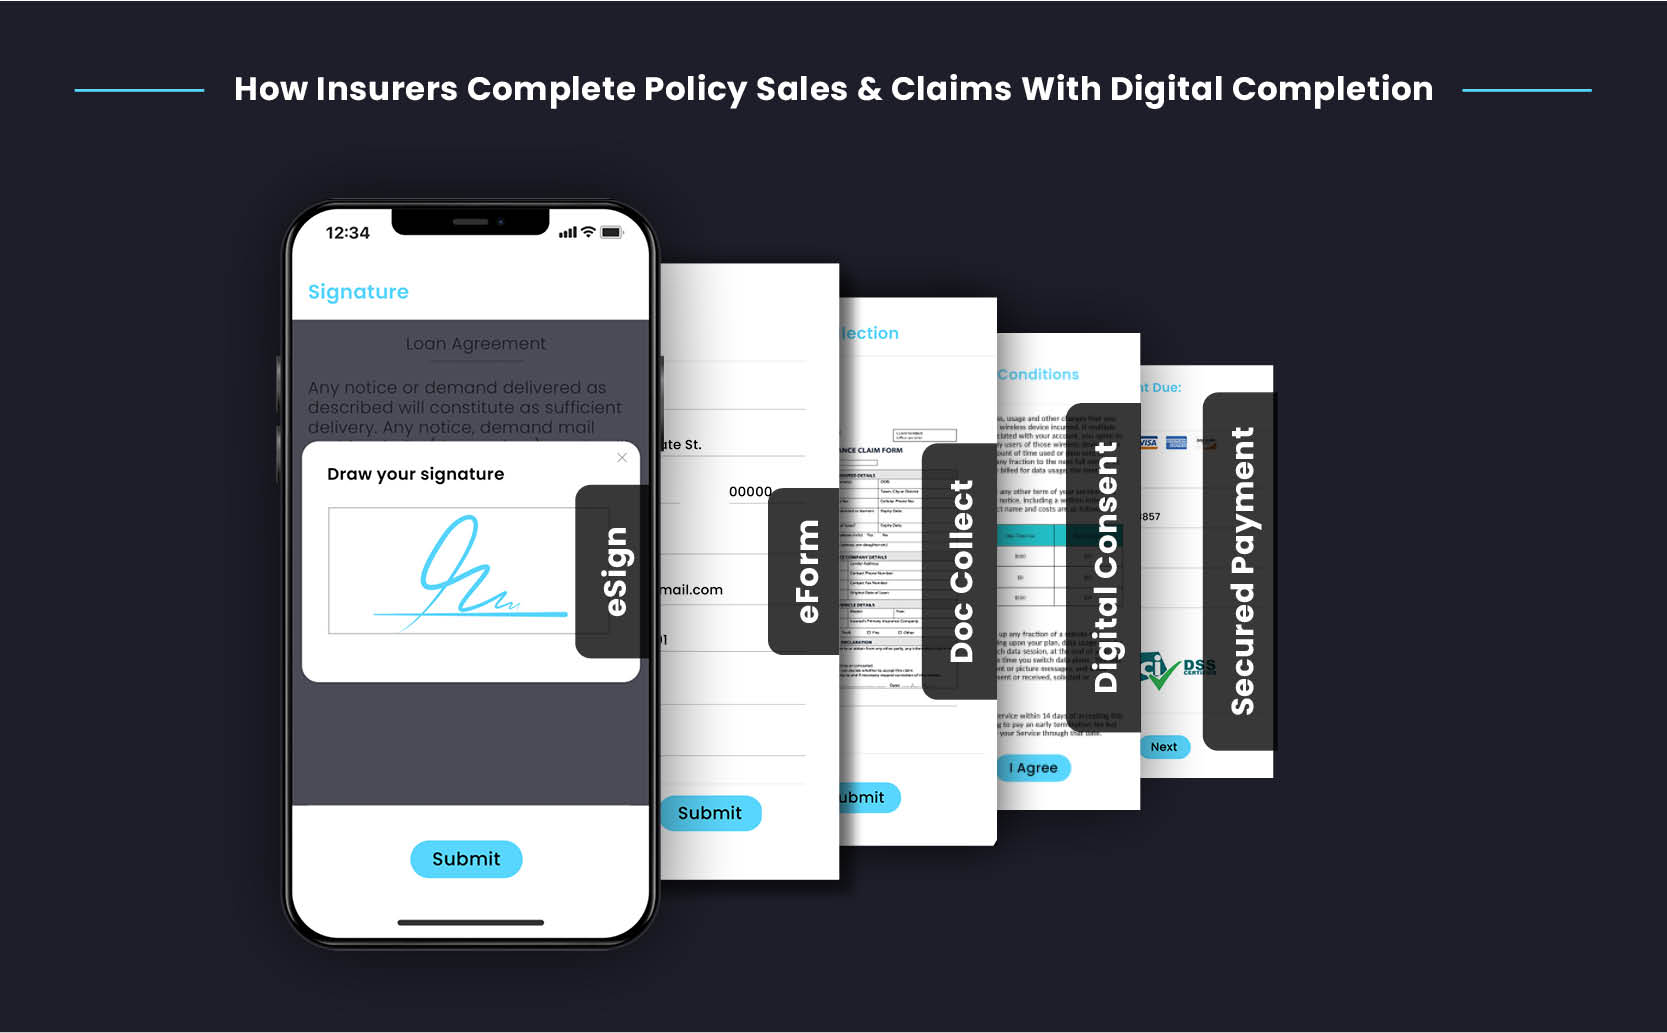 digital-completion-journey-insurnace-How Insurers Complete Policy Sales & Claims With Digital Completion